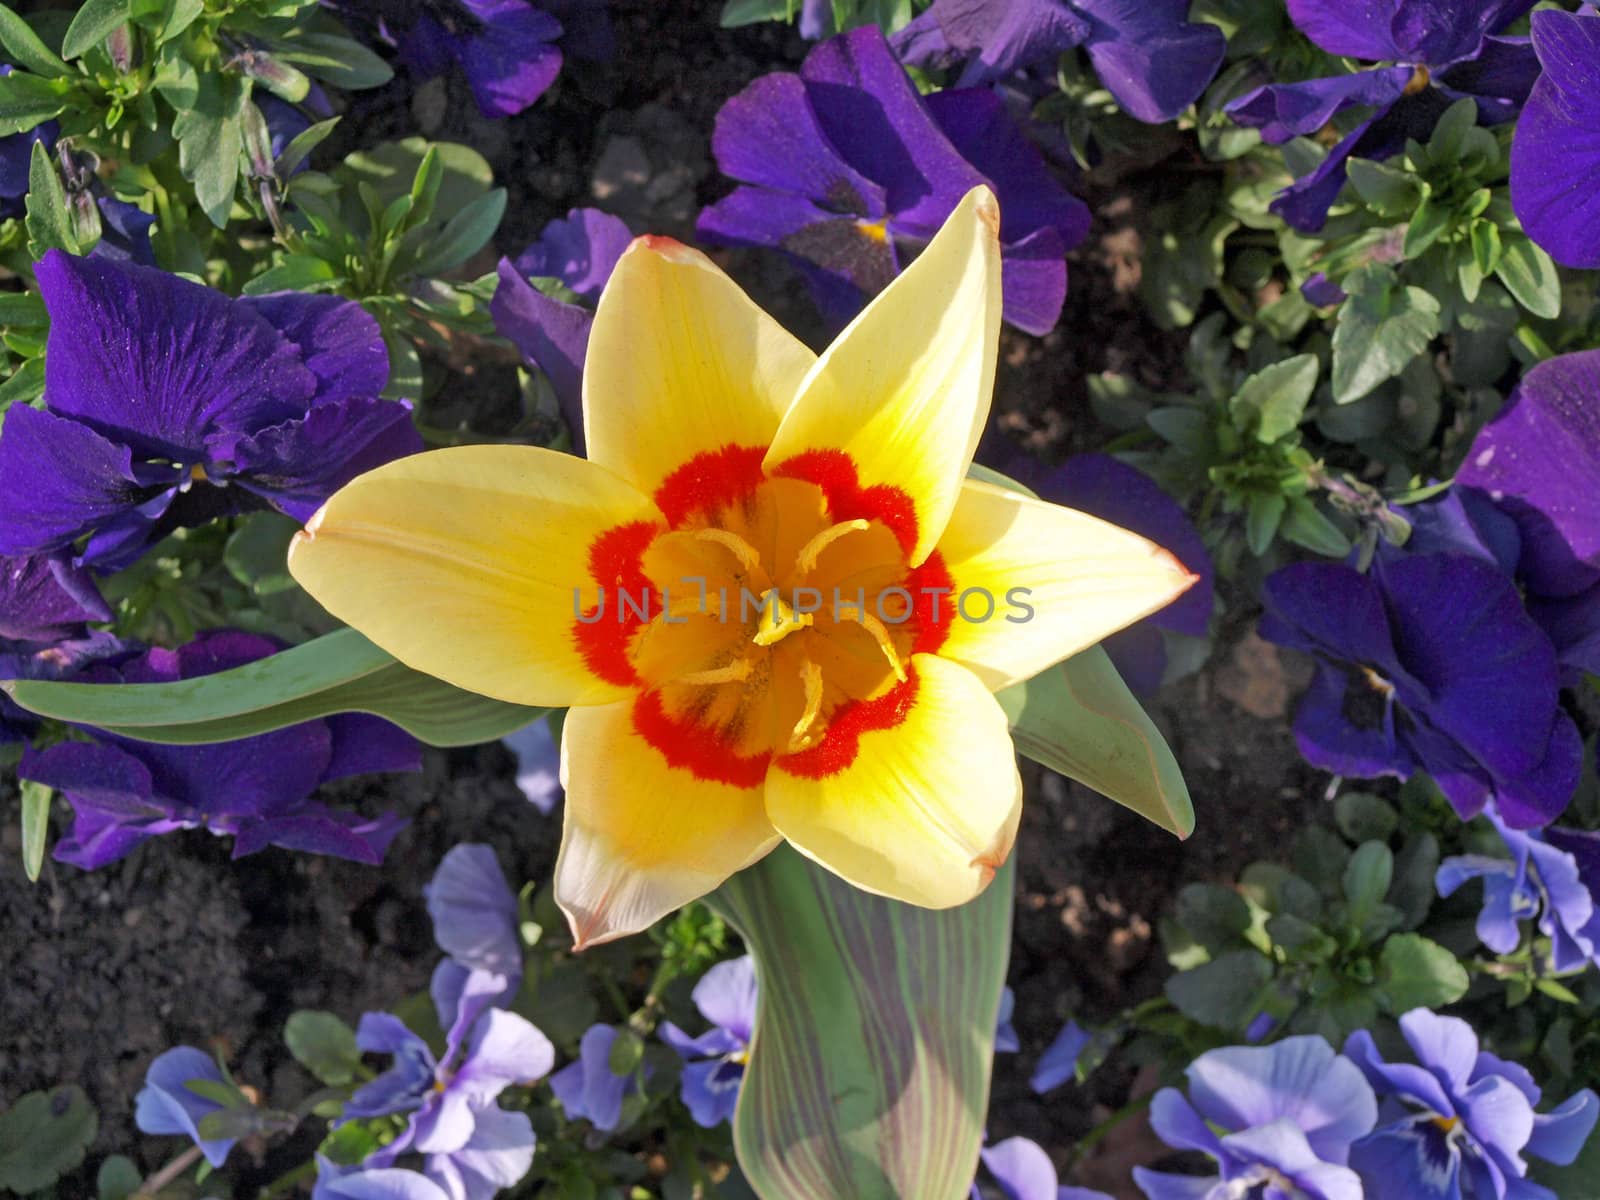 Close-up photo of tulips and pansies in a formal flower bed.